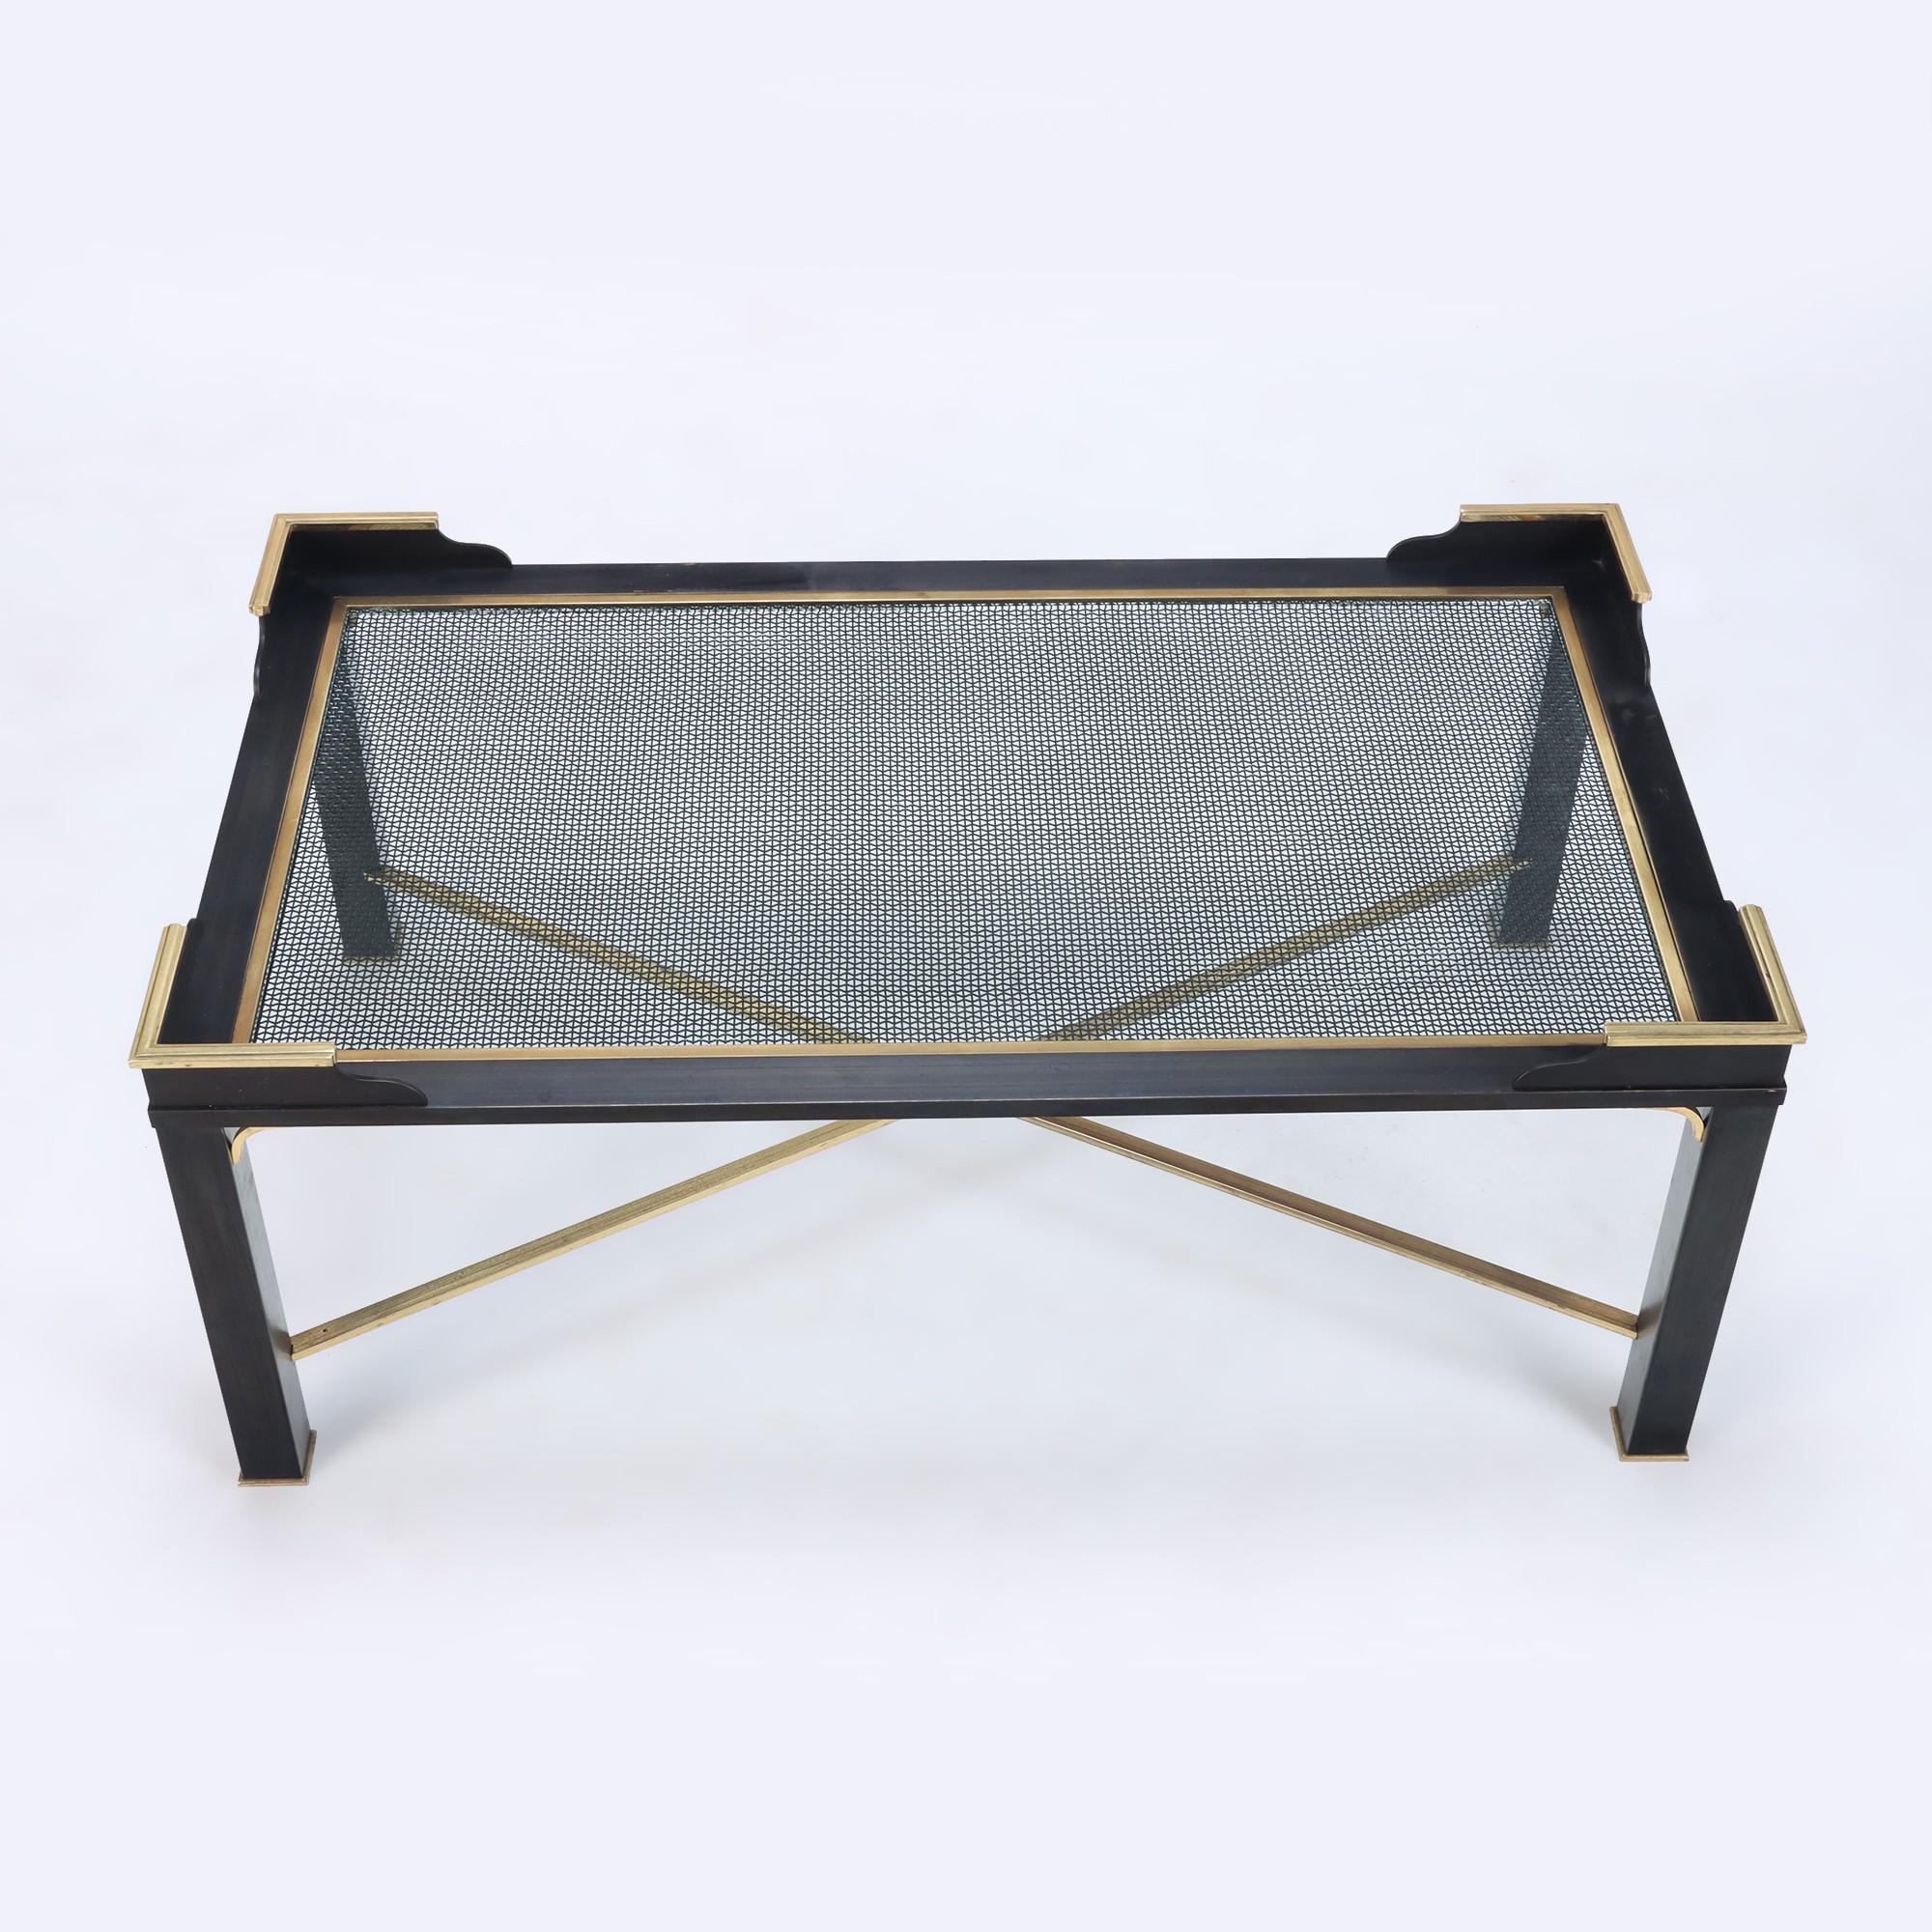 Late 20th Century Pair of French Two Tone Bronze Coffee Tables Attributed to Jansen, C 1970 For Sale